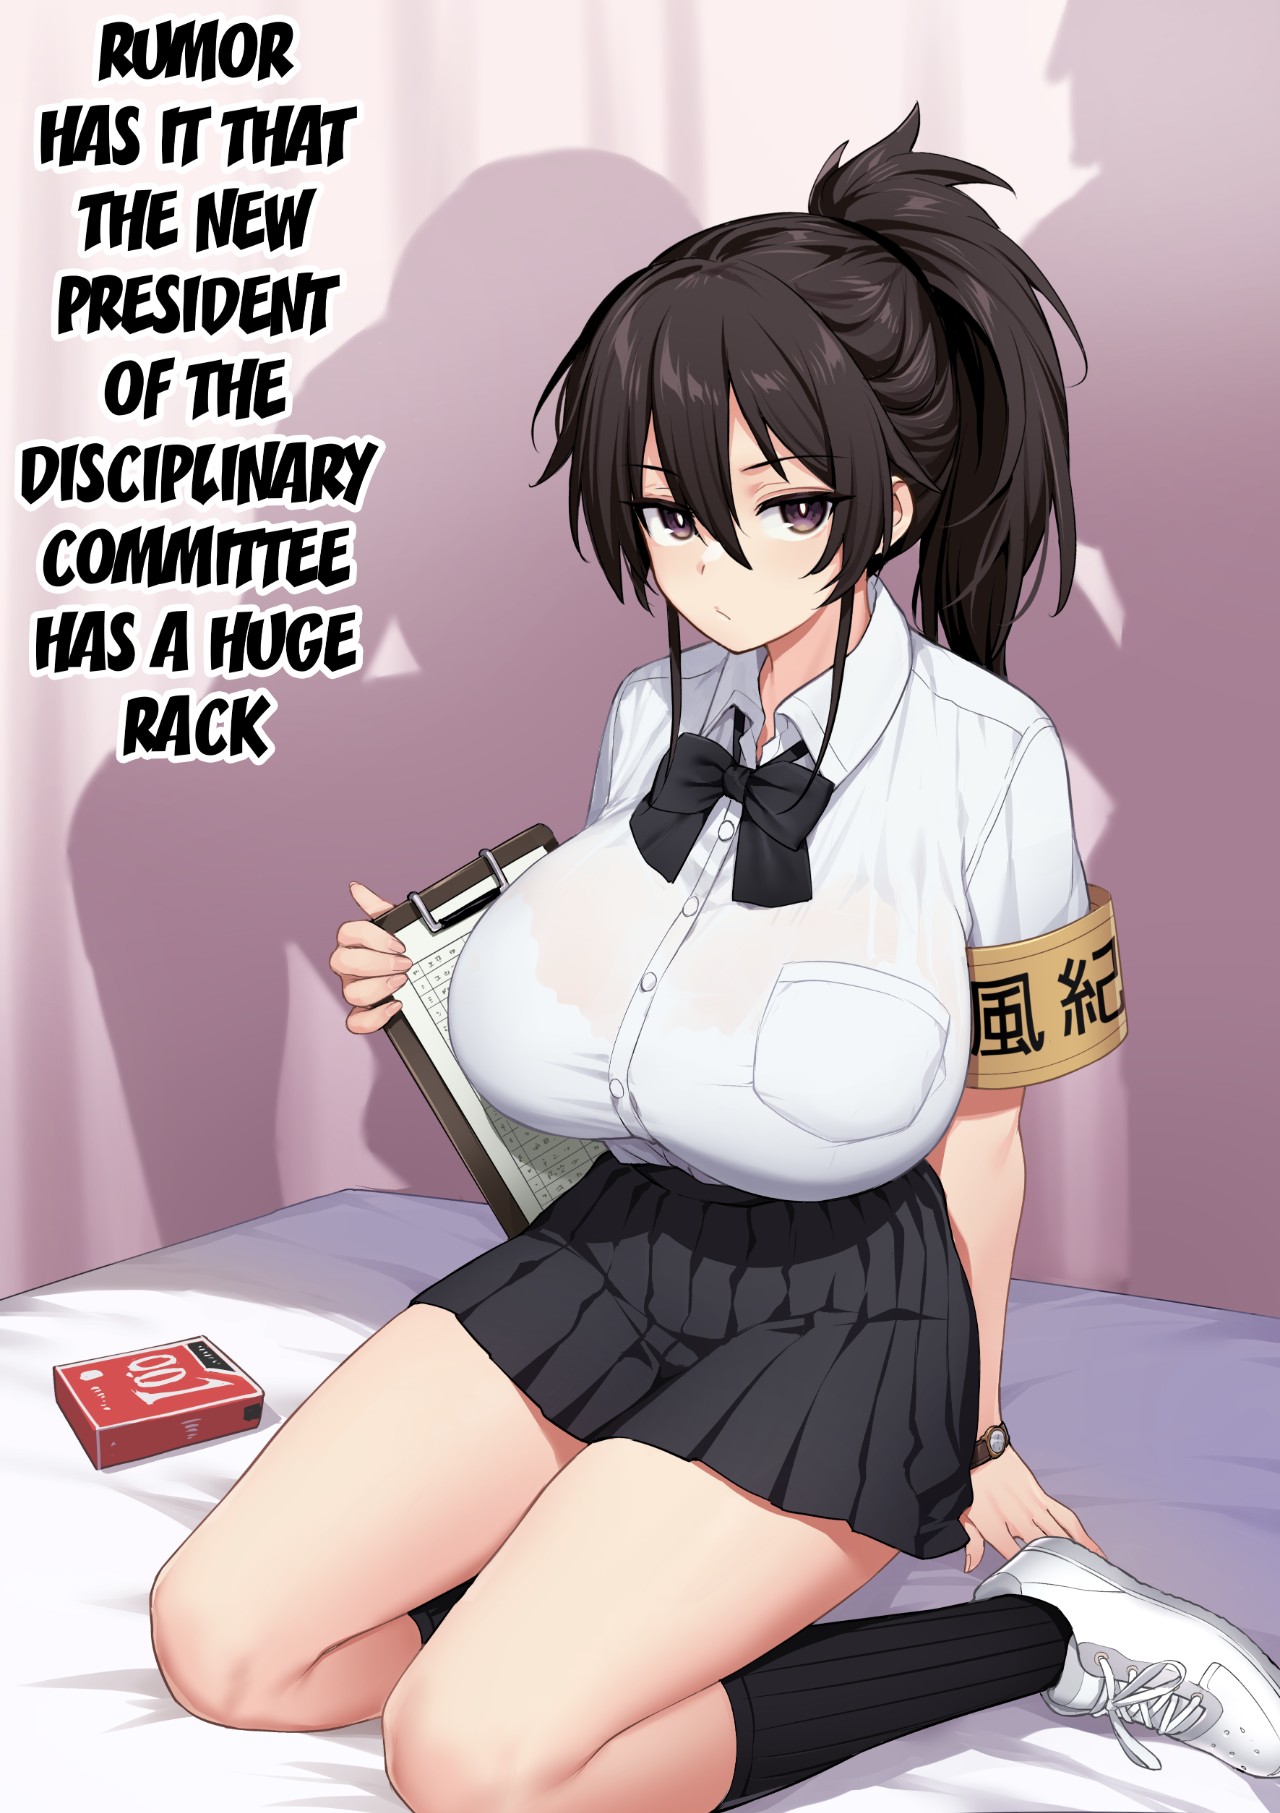 Rumor Has It That The New President Of The Disciplinary Committee Has a Huge Rack Porn Comic english 03